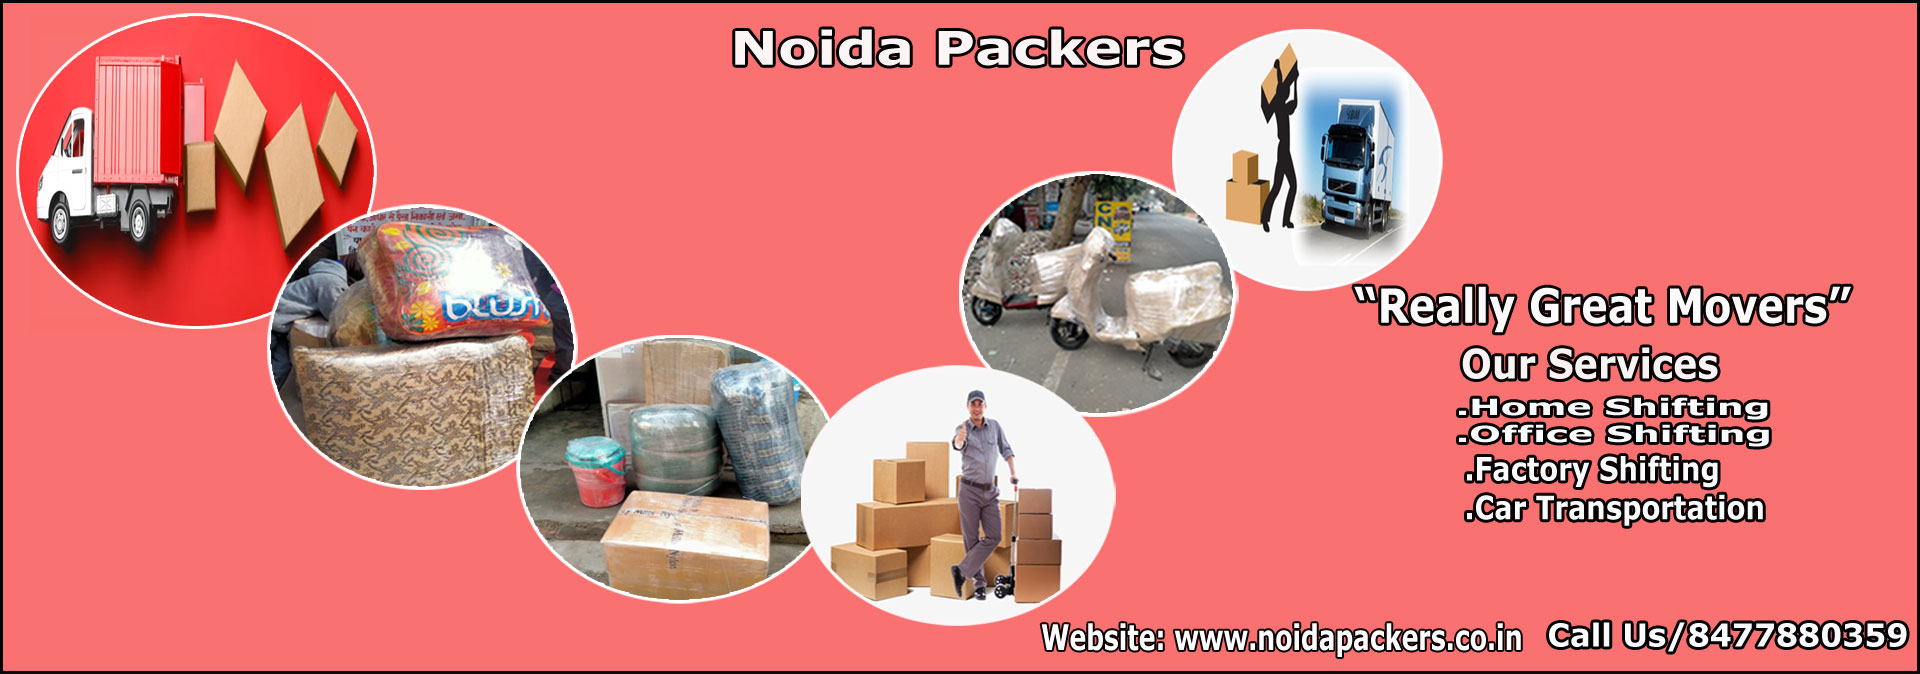 Movers ande Packers Noida Sector 132